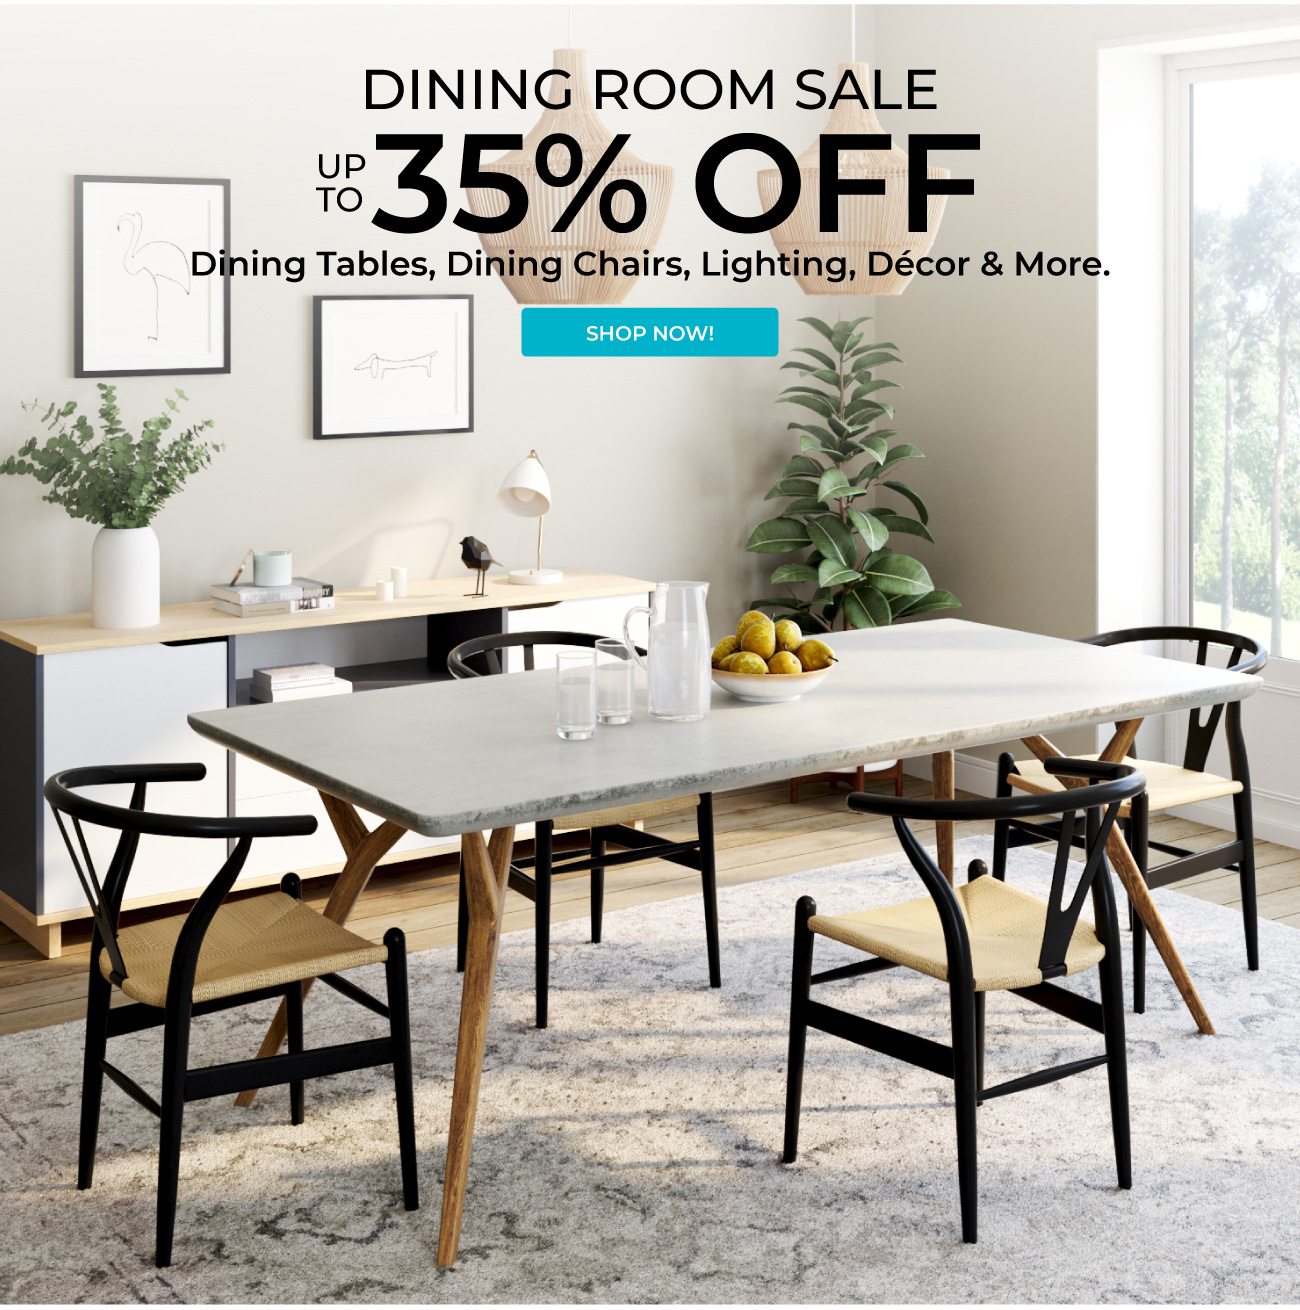 Dining Room Sale | Up to 35% Off | Shop Now